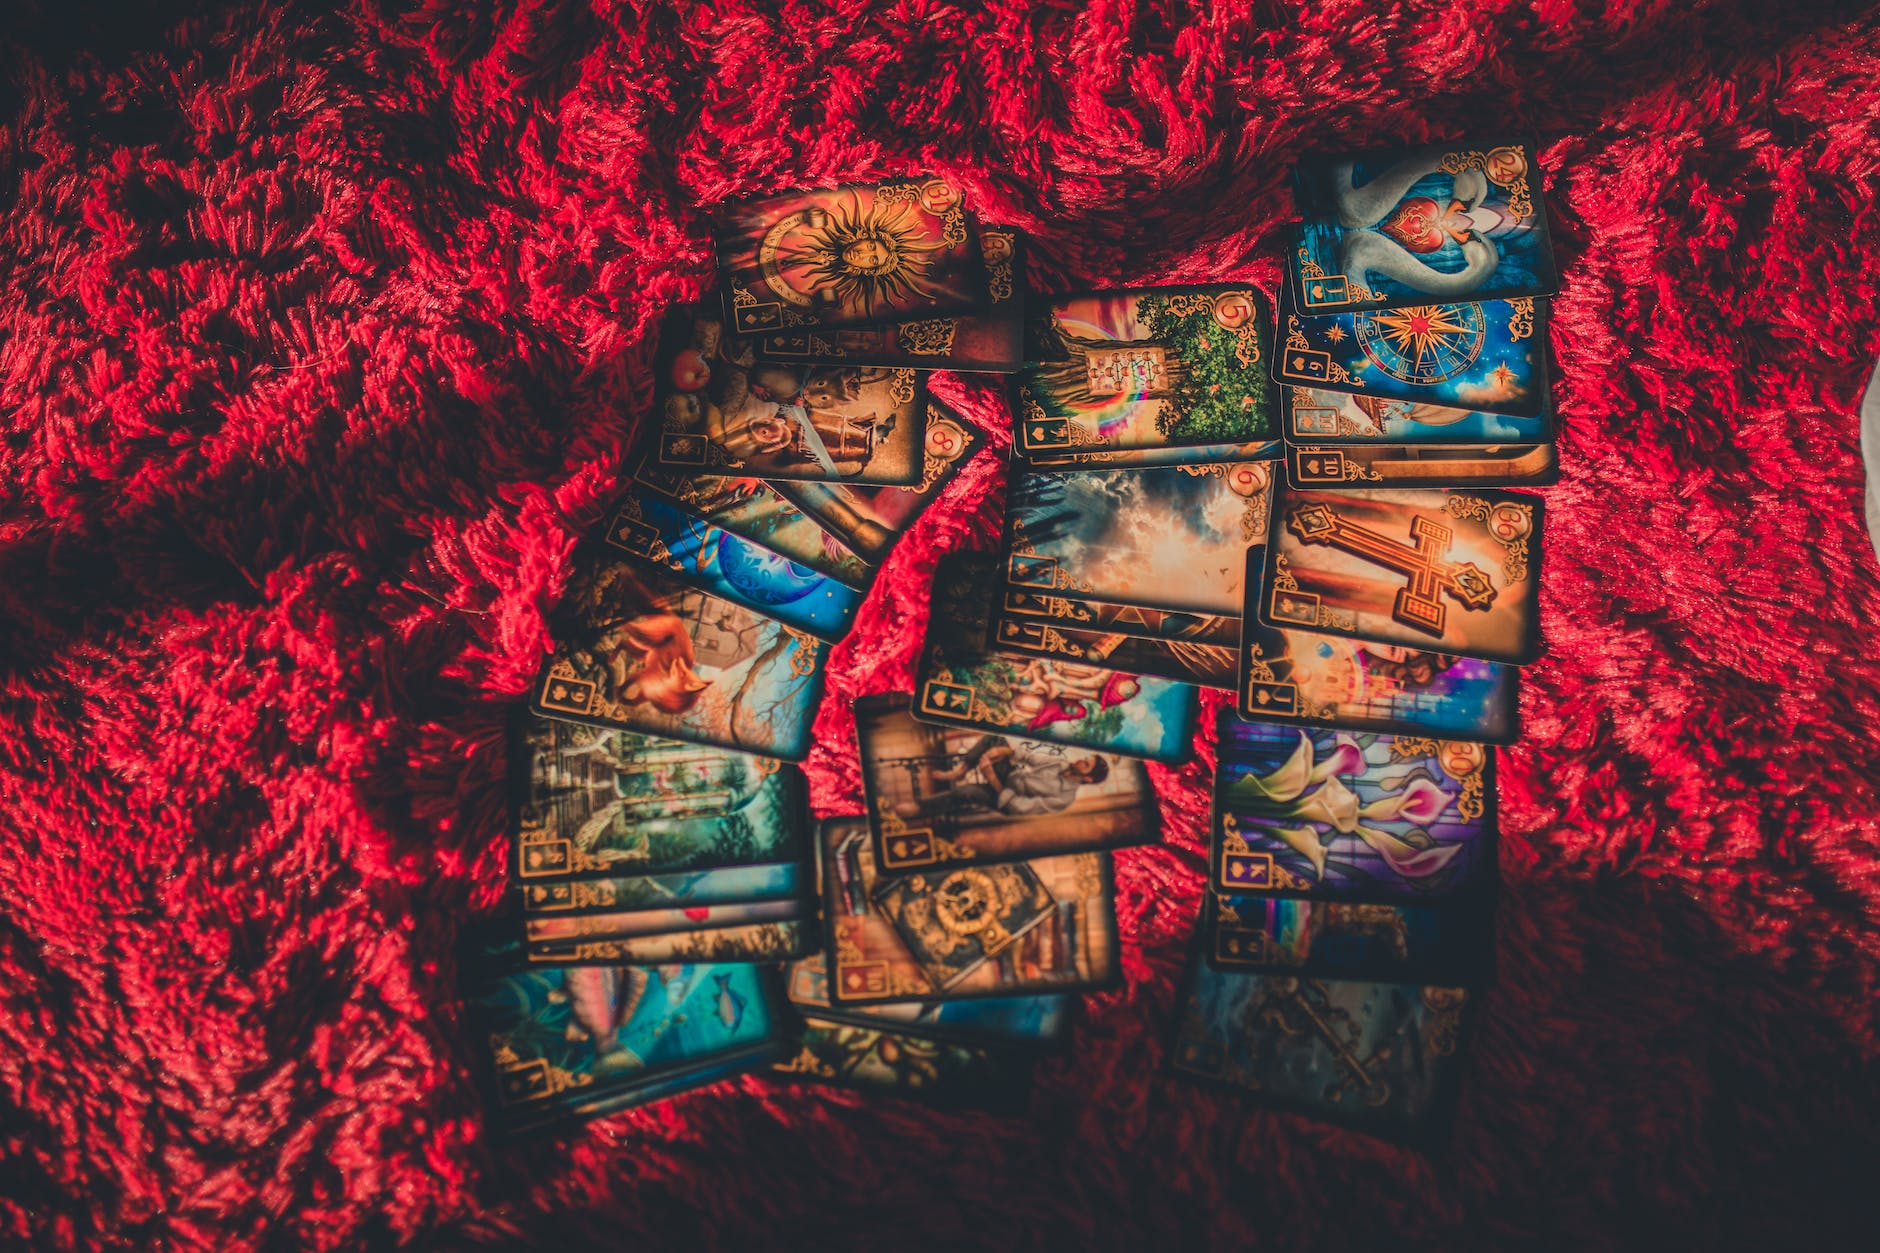 tarot cards laid out on red fabric